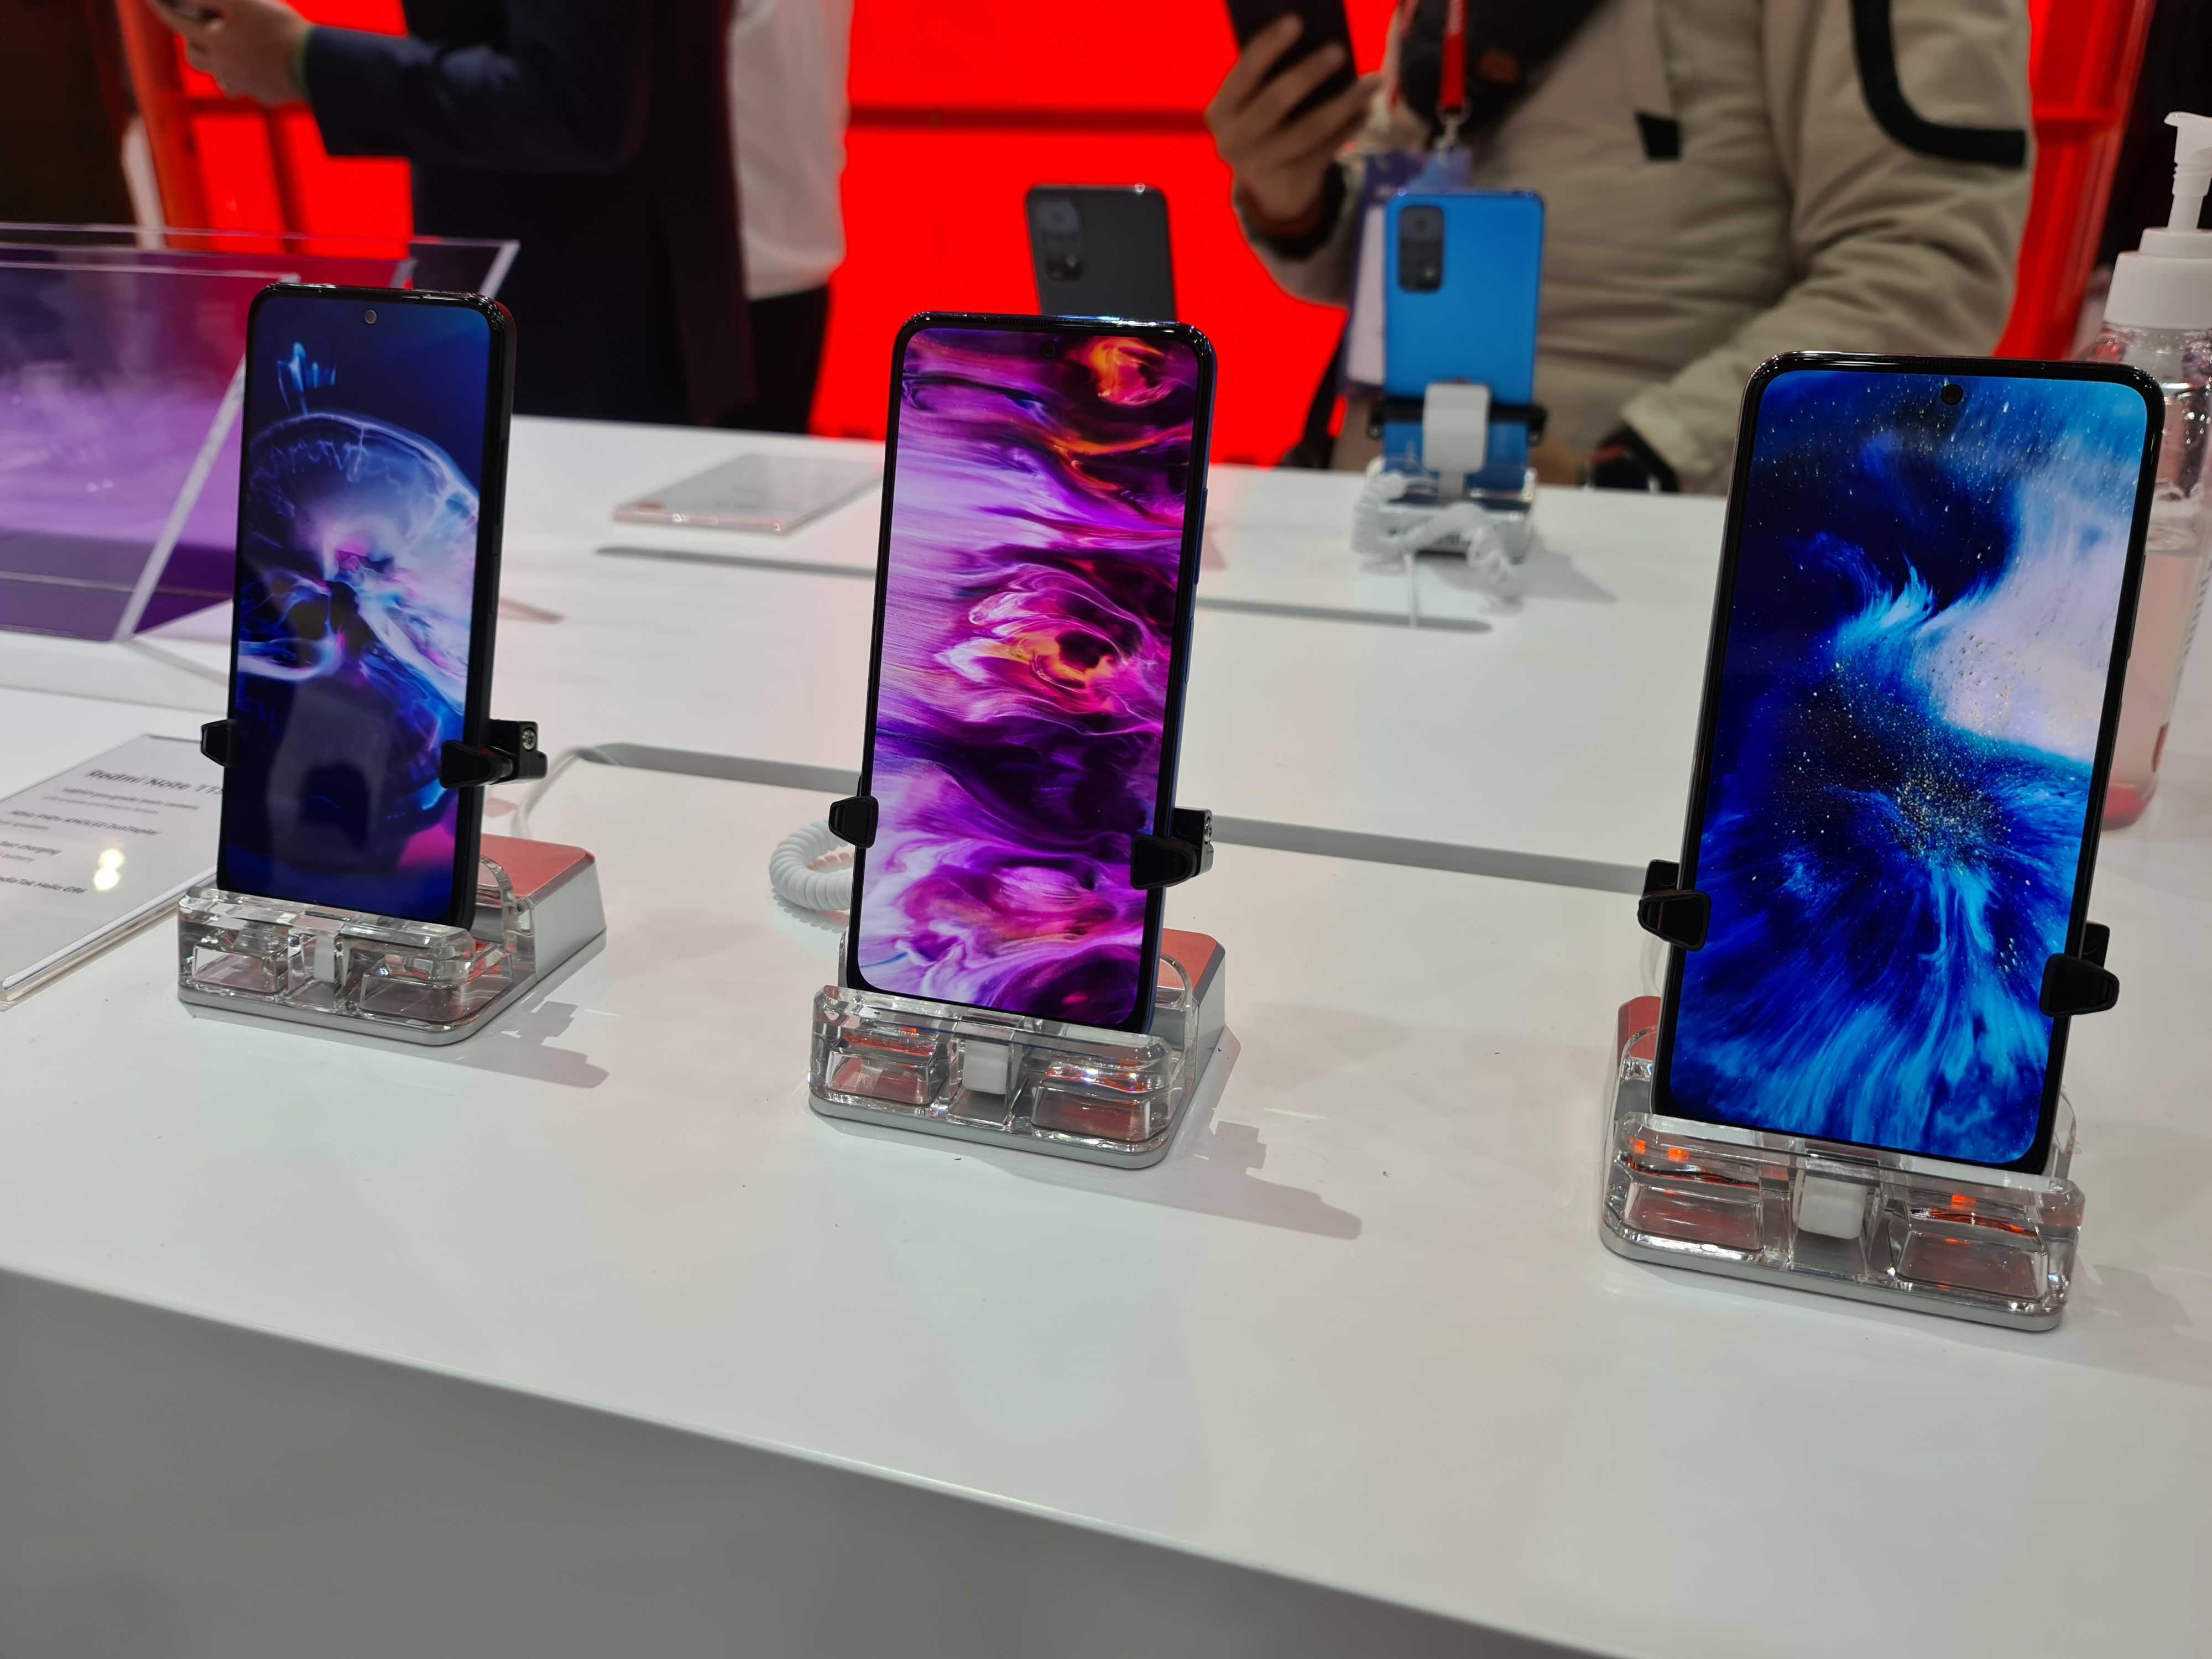 With Huawei out of the picture, Chinese smartphone rivals take the spotlight at MWC